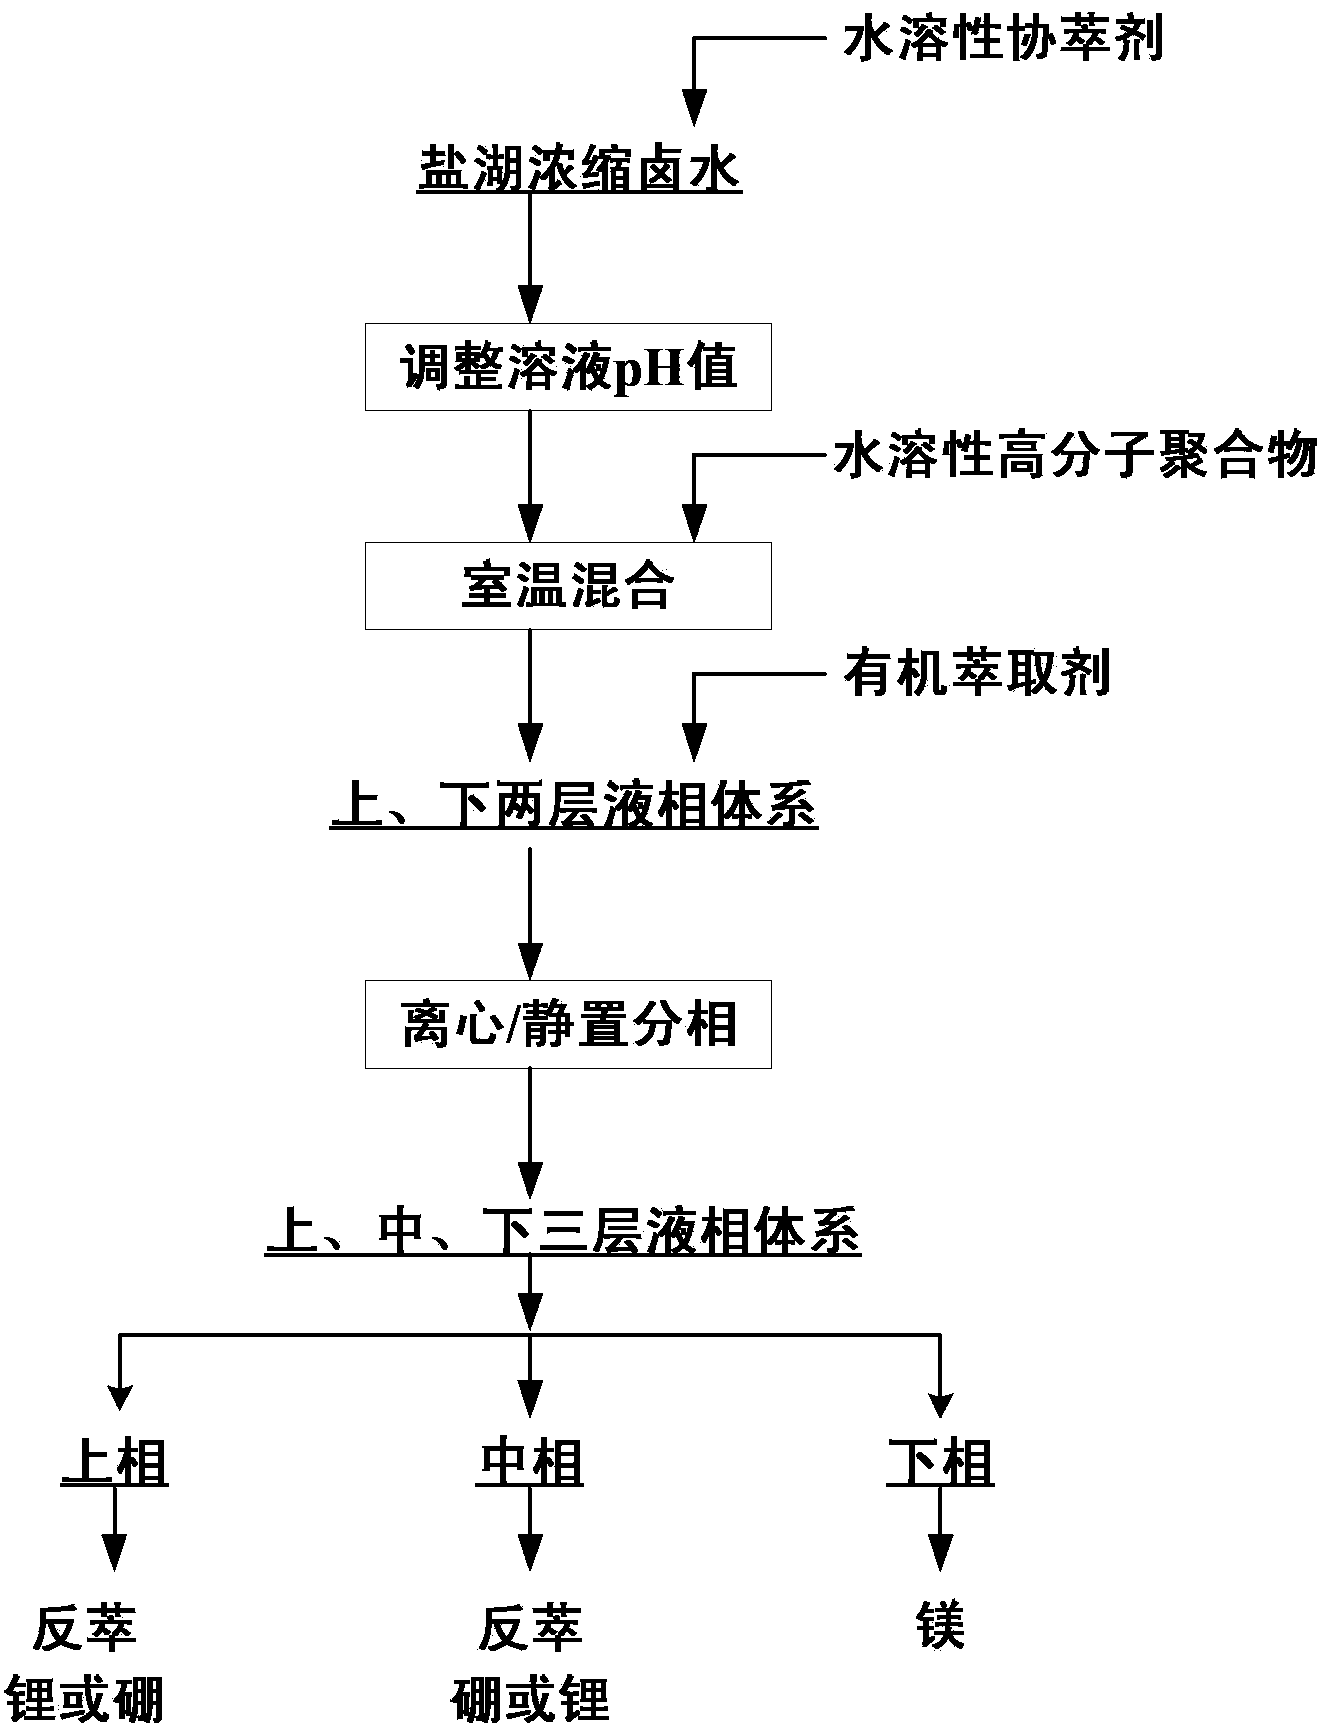 Method for preenriching and separating lithium and boron from salt lake brine by liquid-liquid-liquid three-phase extraction